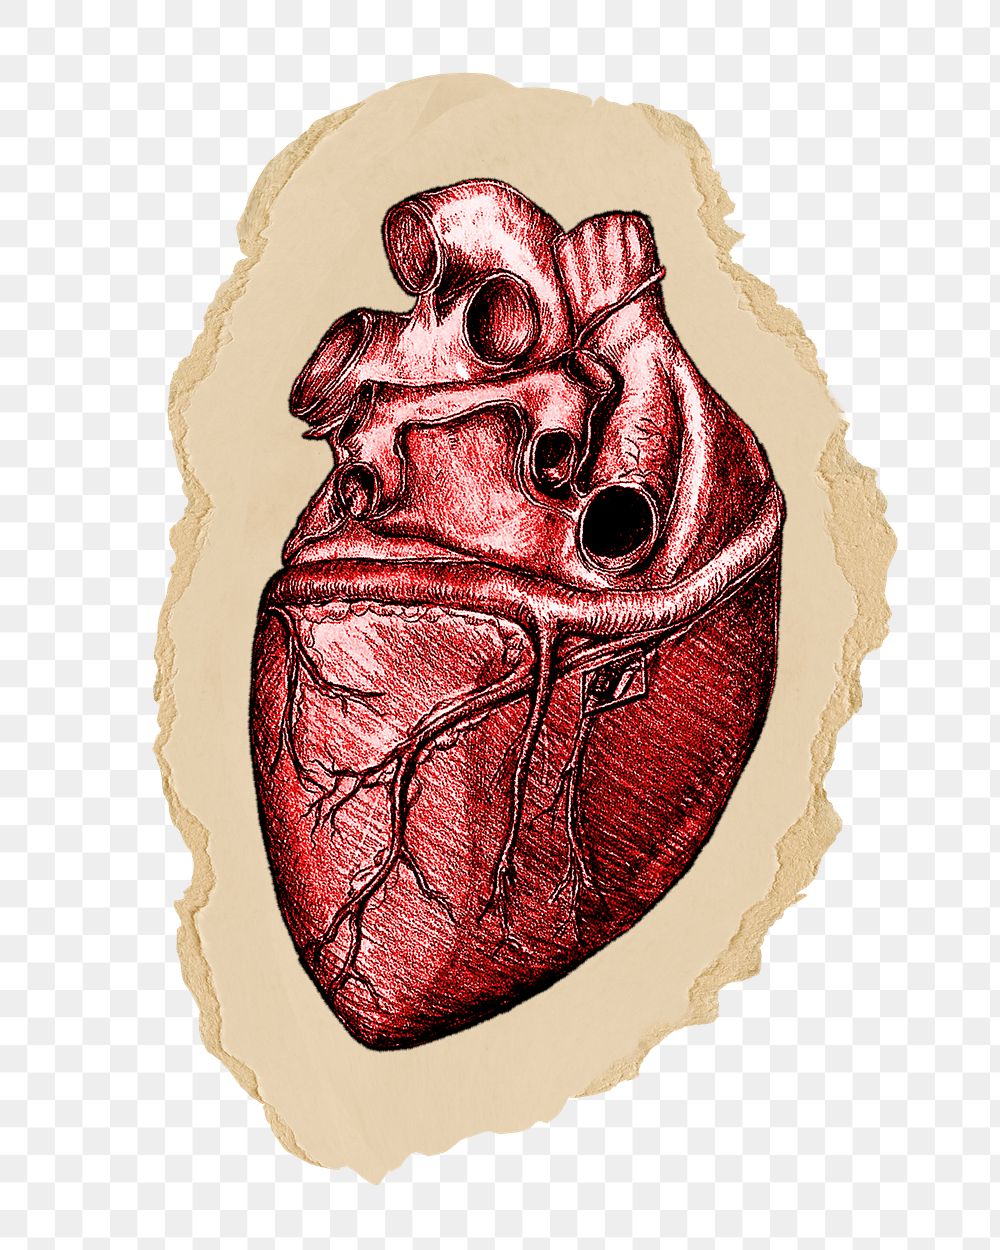 Realistic heart png sticker, ripped paper, transparent background